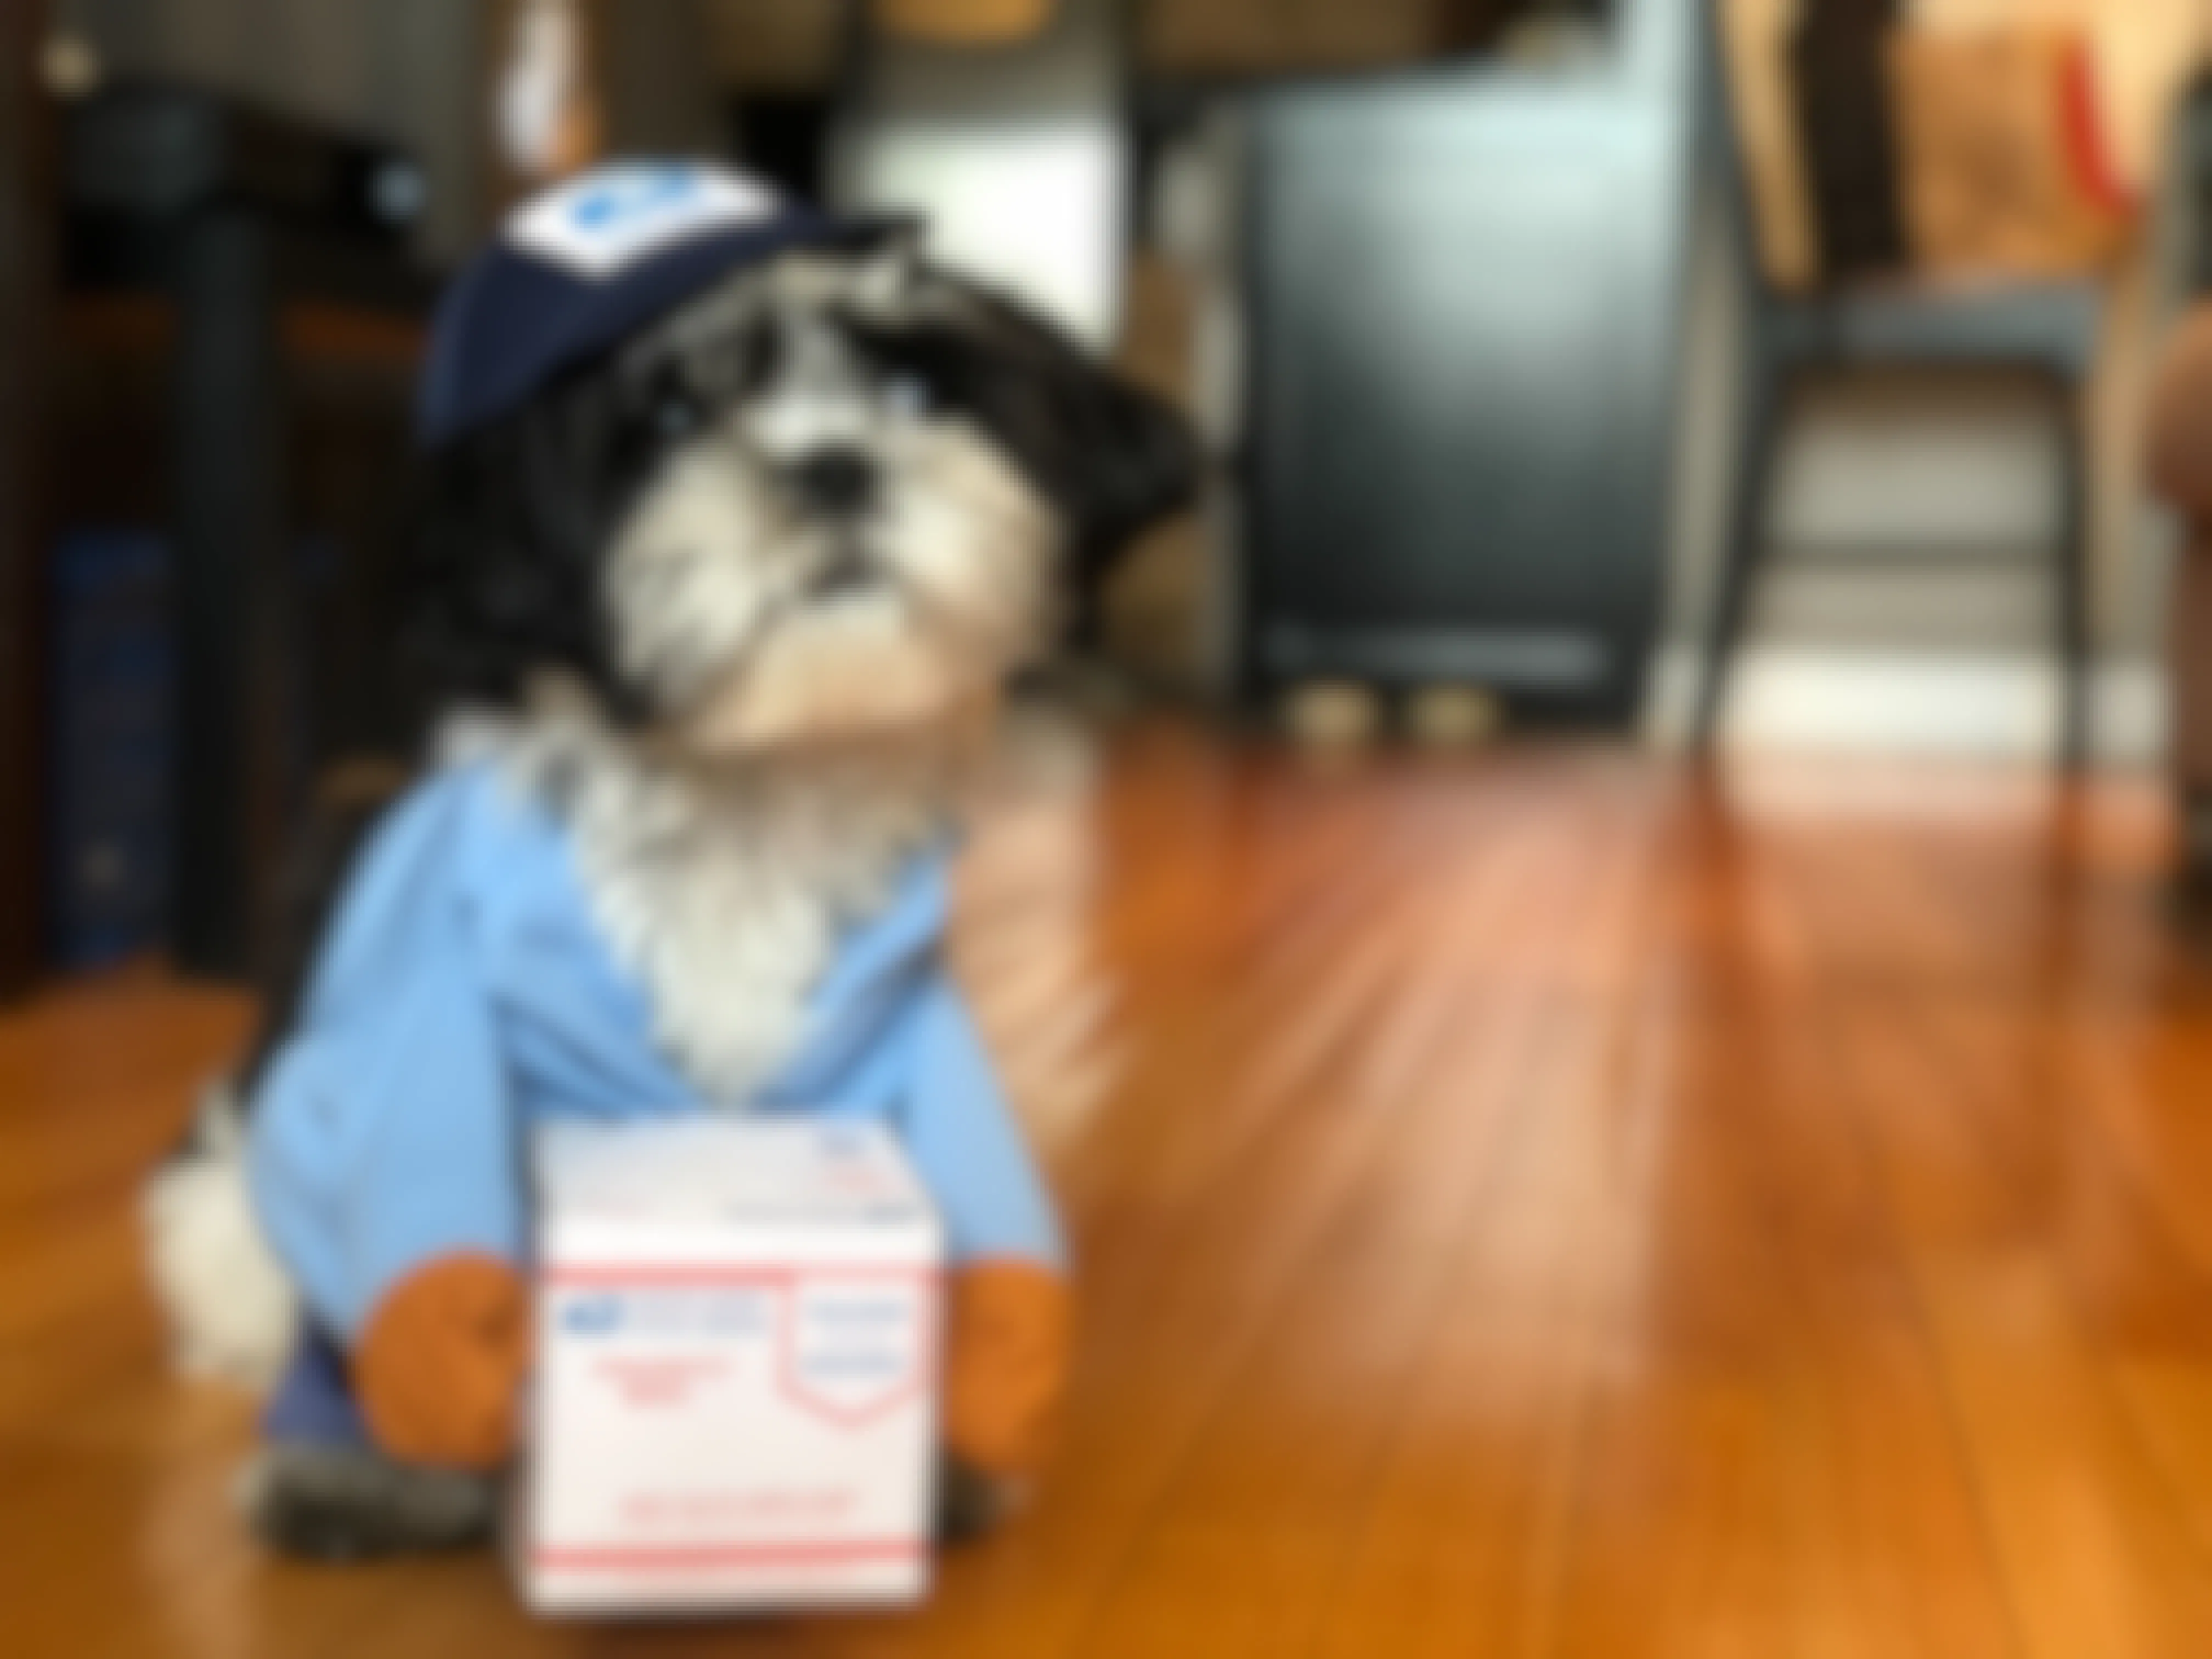 A small black and white dog dressed in a US Postal Service costume with a little package.